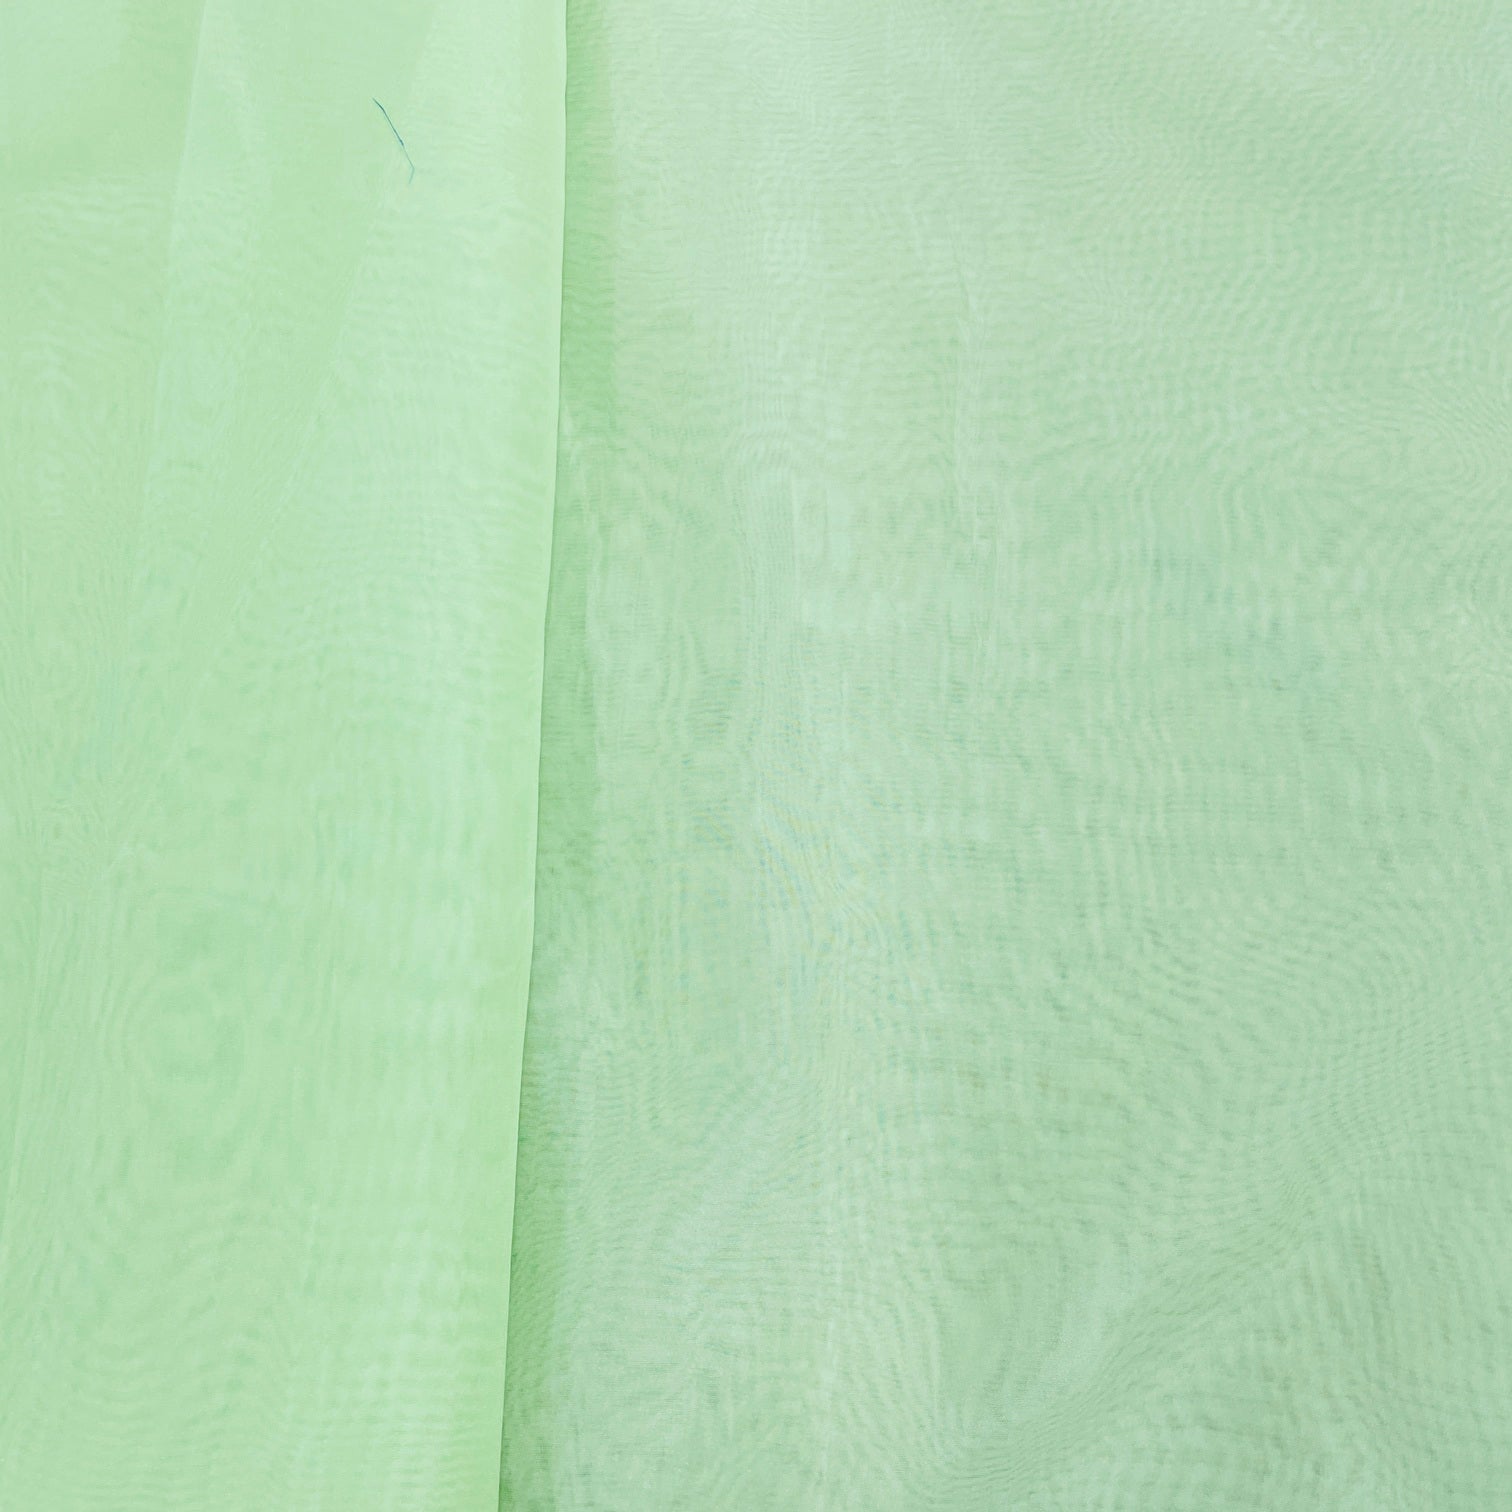 Exclusive Mint Green Solid Organza Fabric